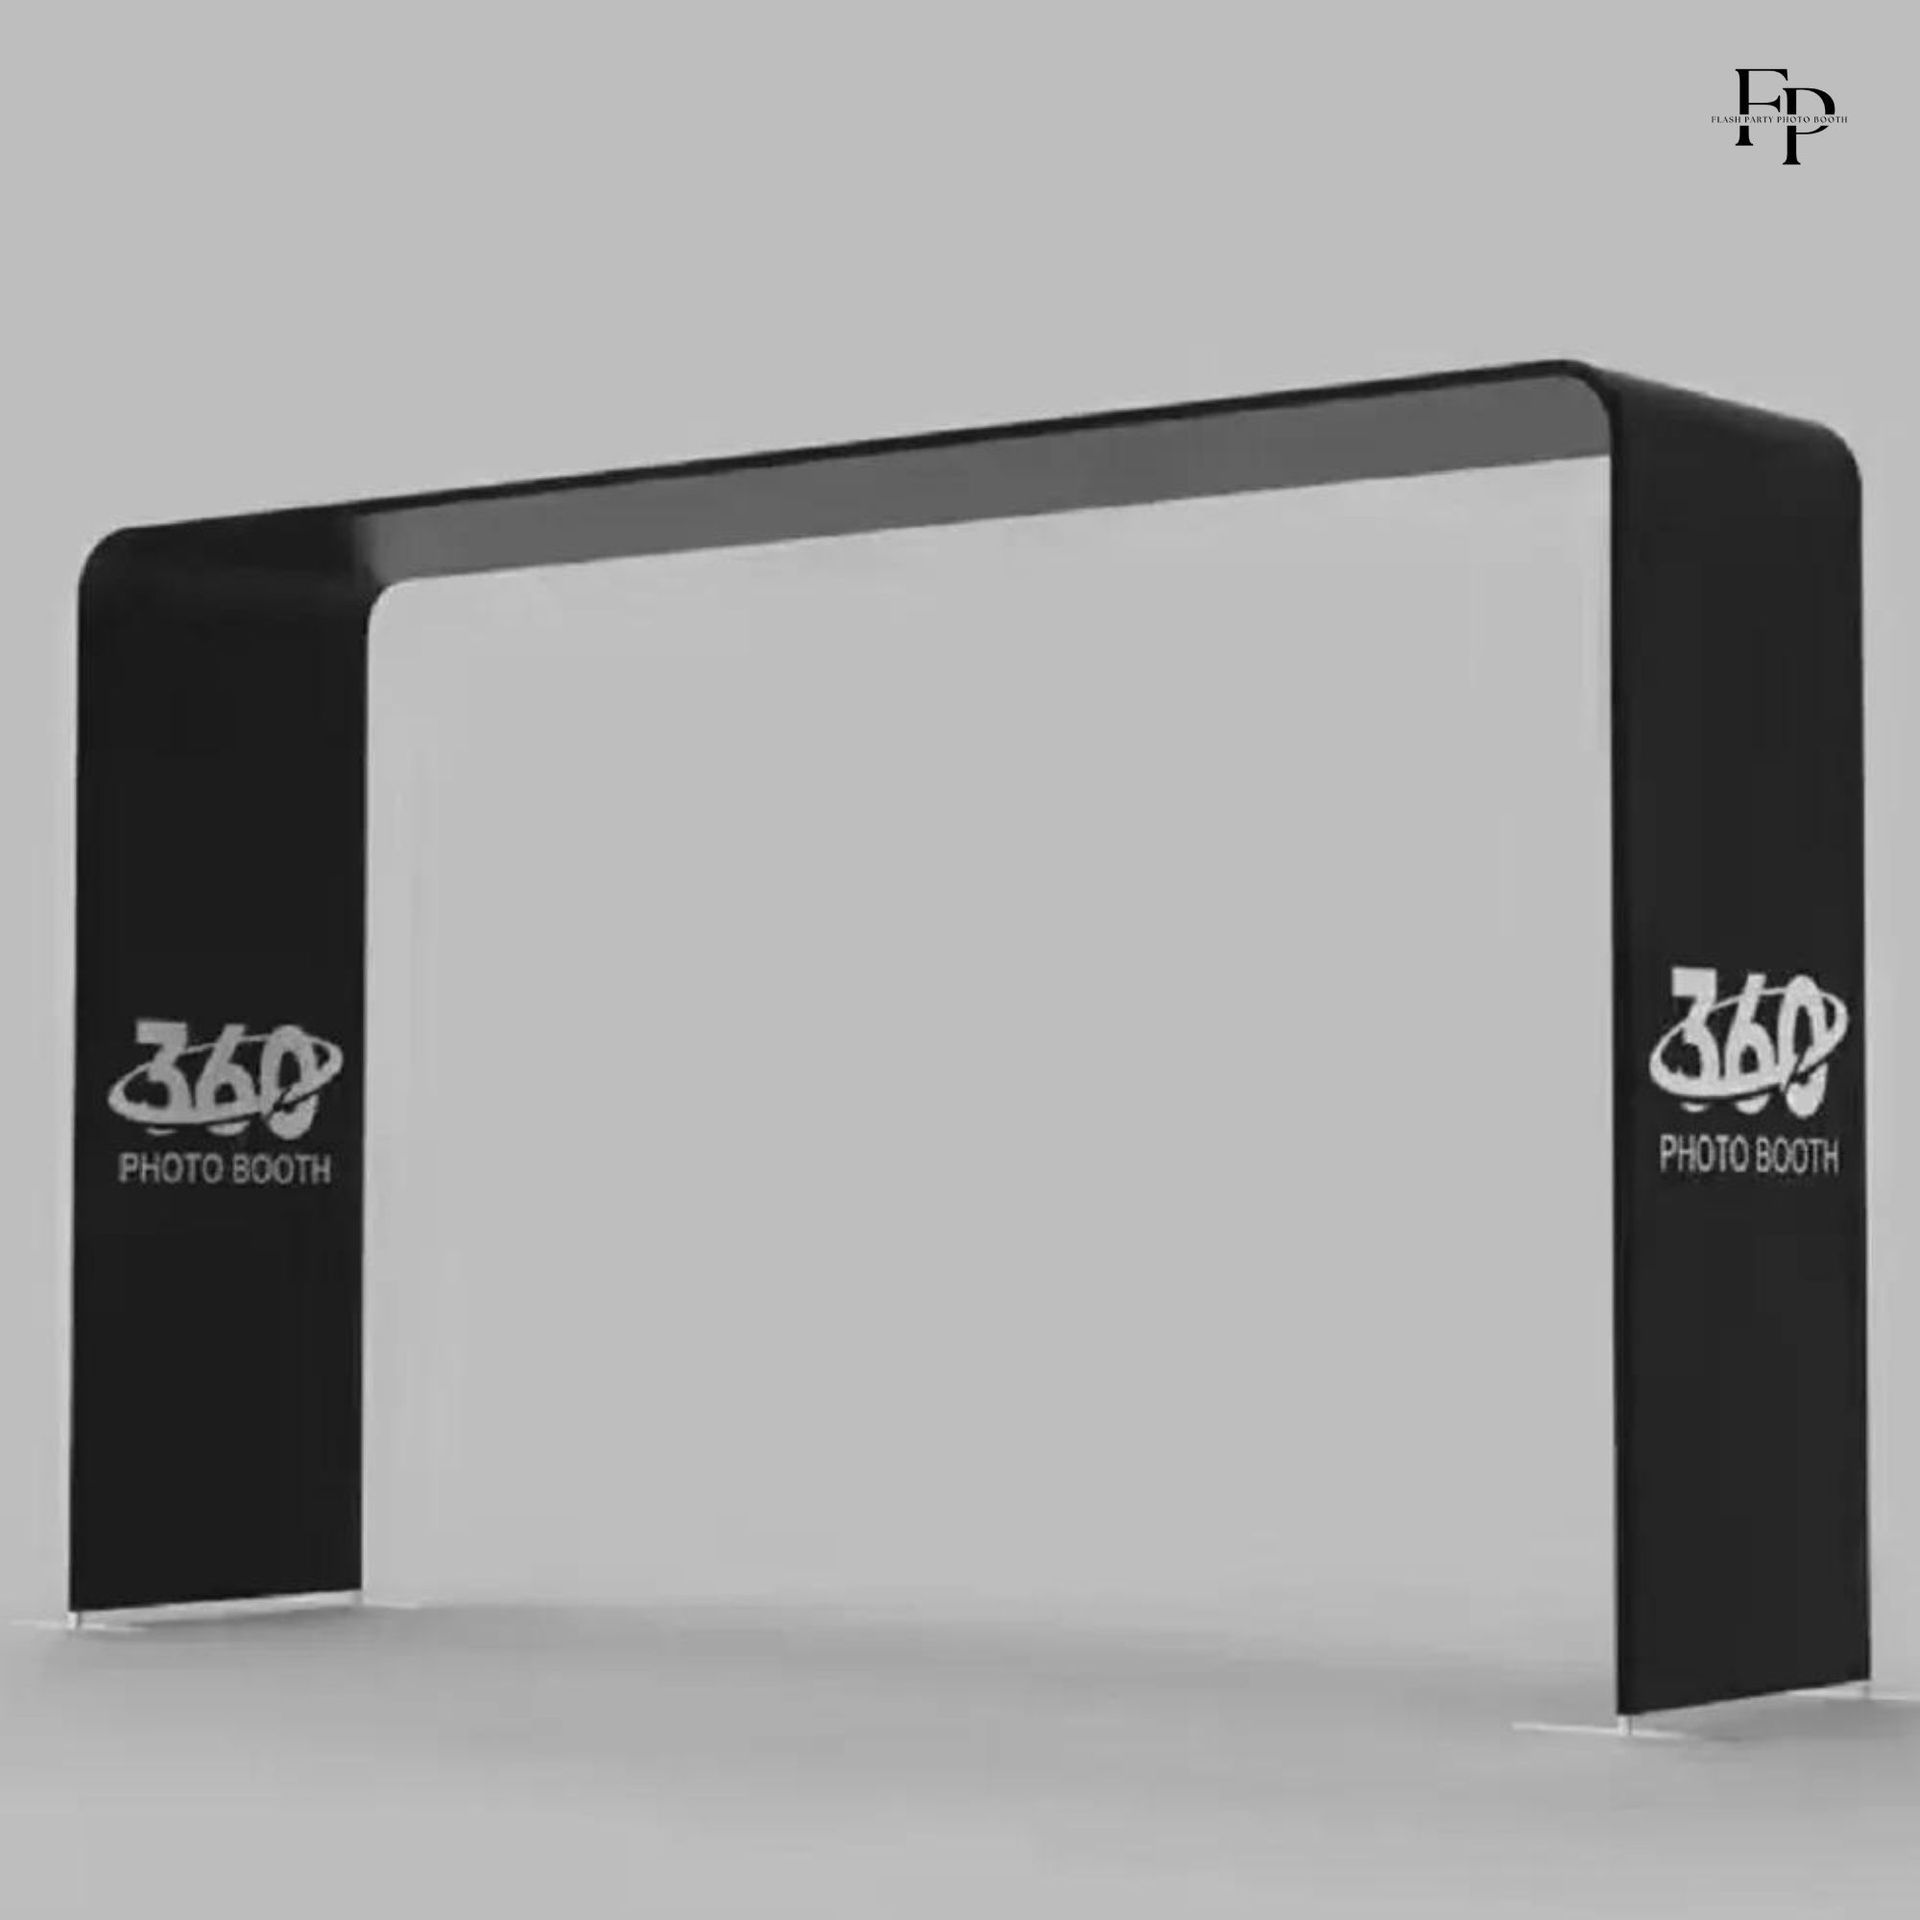 An image of Overhead 360 Photo Booth.